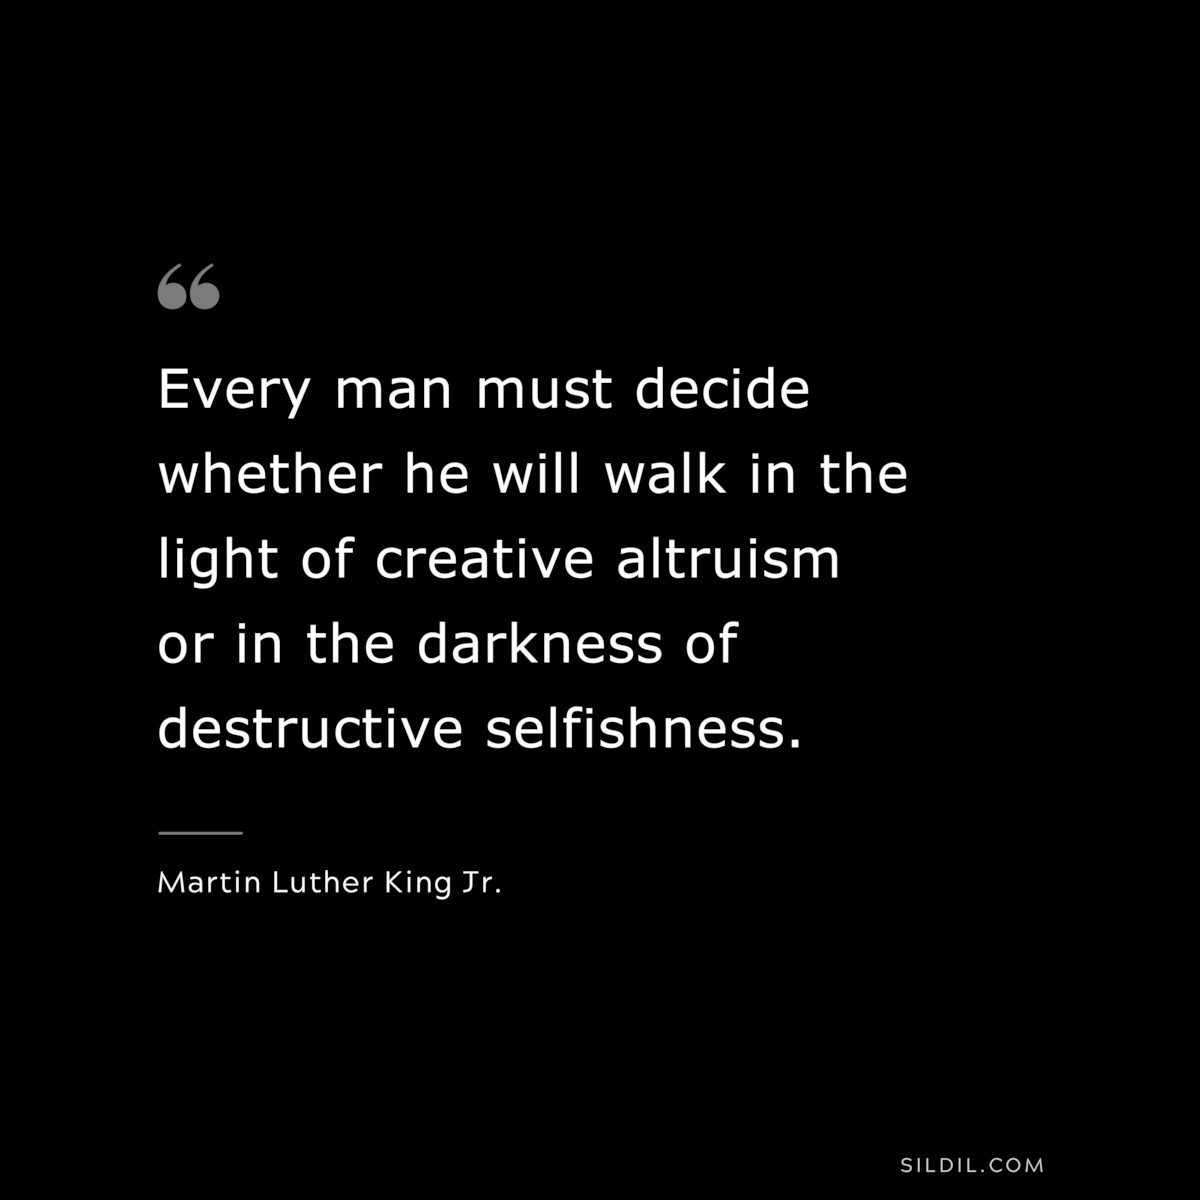 Every man must decide whether he will walk in the light of creative altruism or in the darkness of destructive selfishness. ― Martin Luther King Jr.